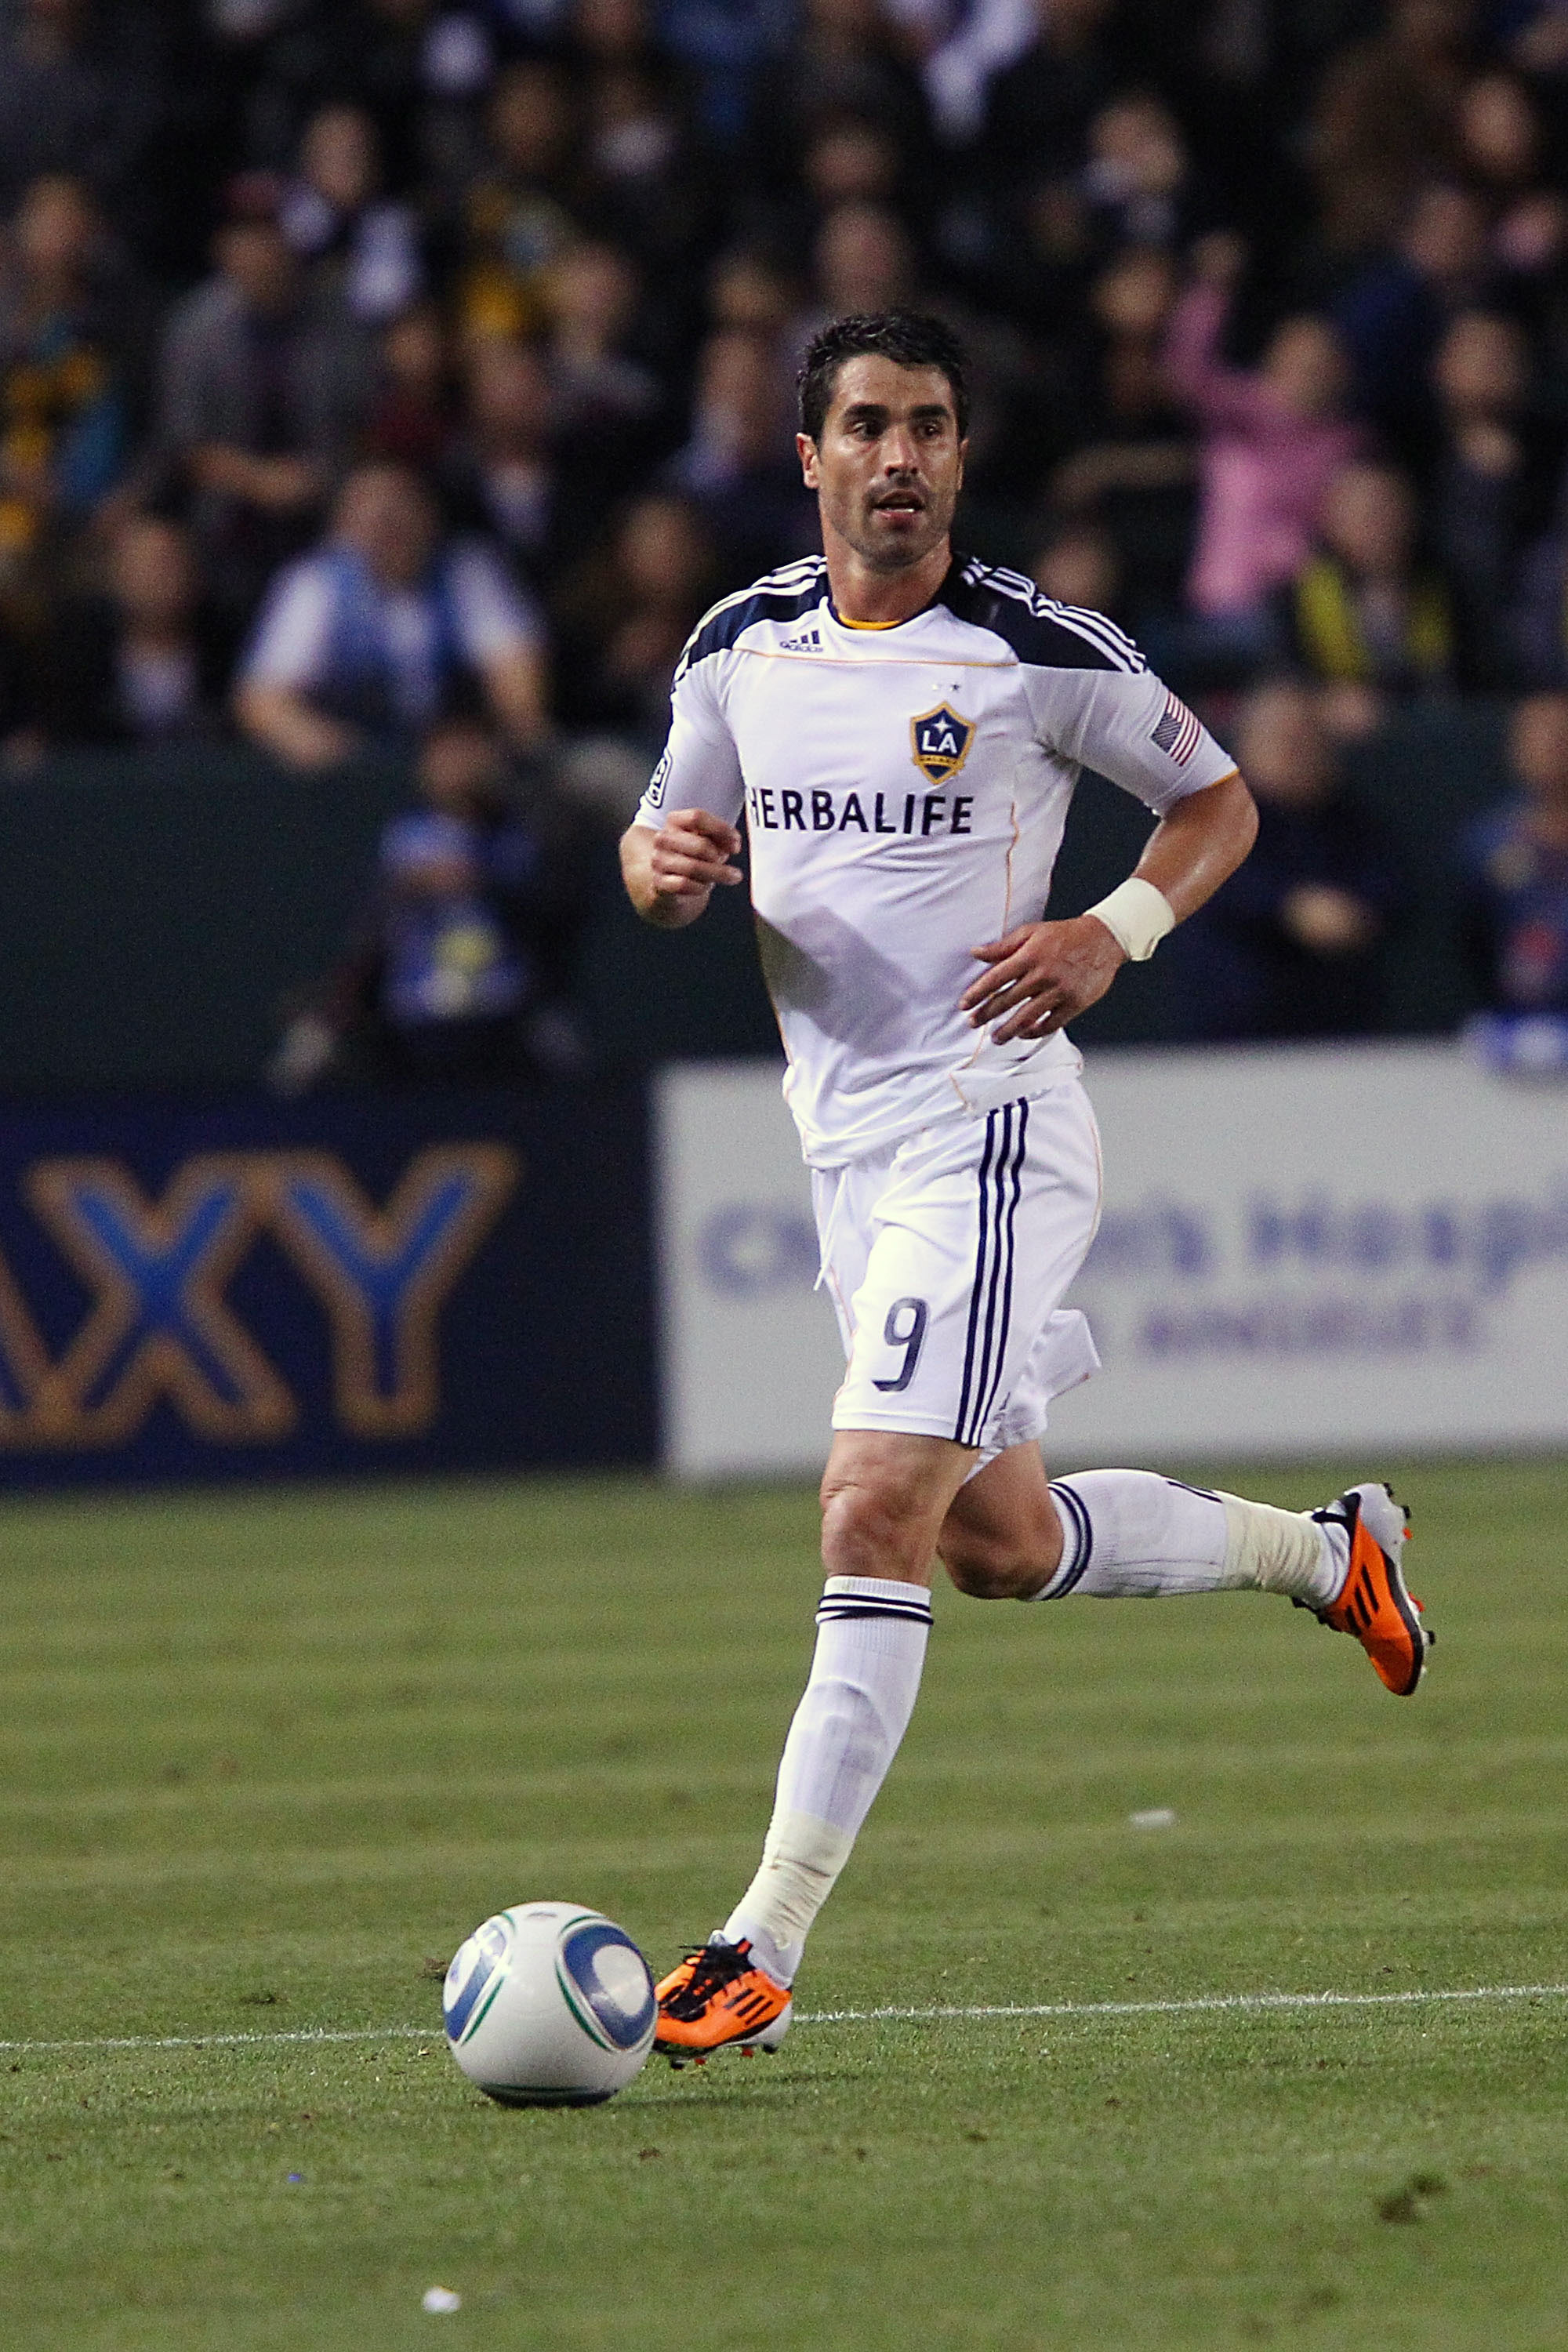 CARSON, CA - APRIL 02:  Juan Pablo Angel #9 of the Los Angeles Galaxy controls the ball during the Philadelphia Union v Los Angeles Galaxy Match at The Home Depot Center on April 2, 2011 in Carson, California.  (Photo by Joe Scarnici/Getty Images)